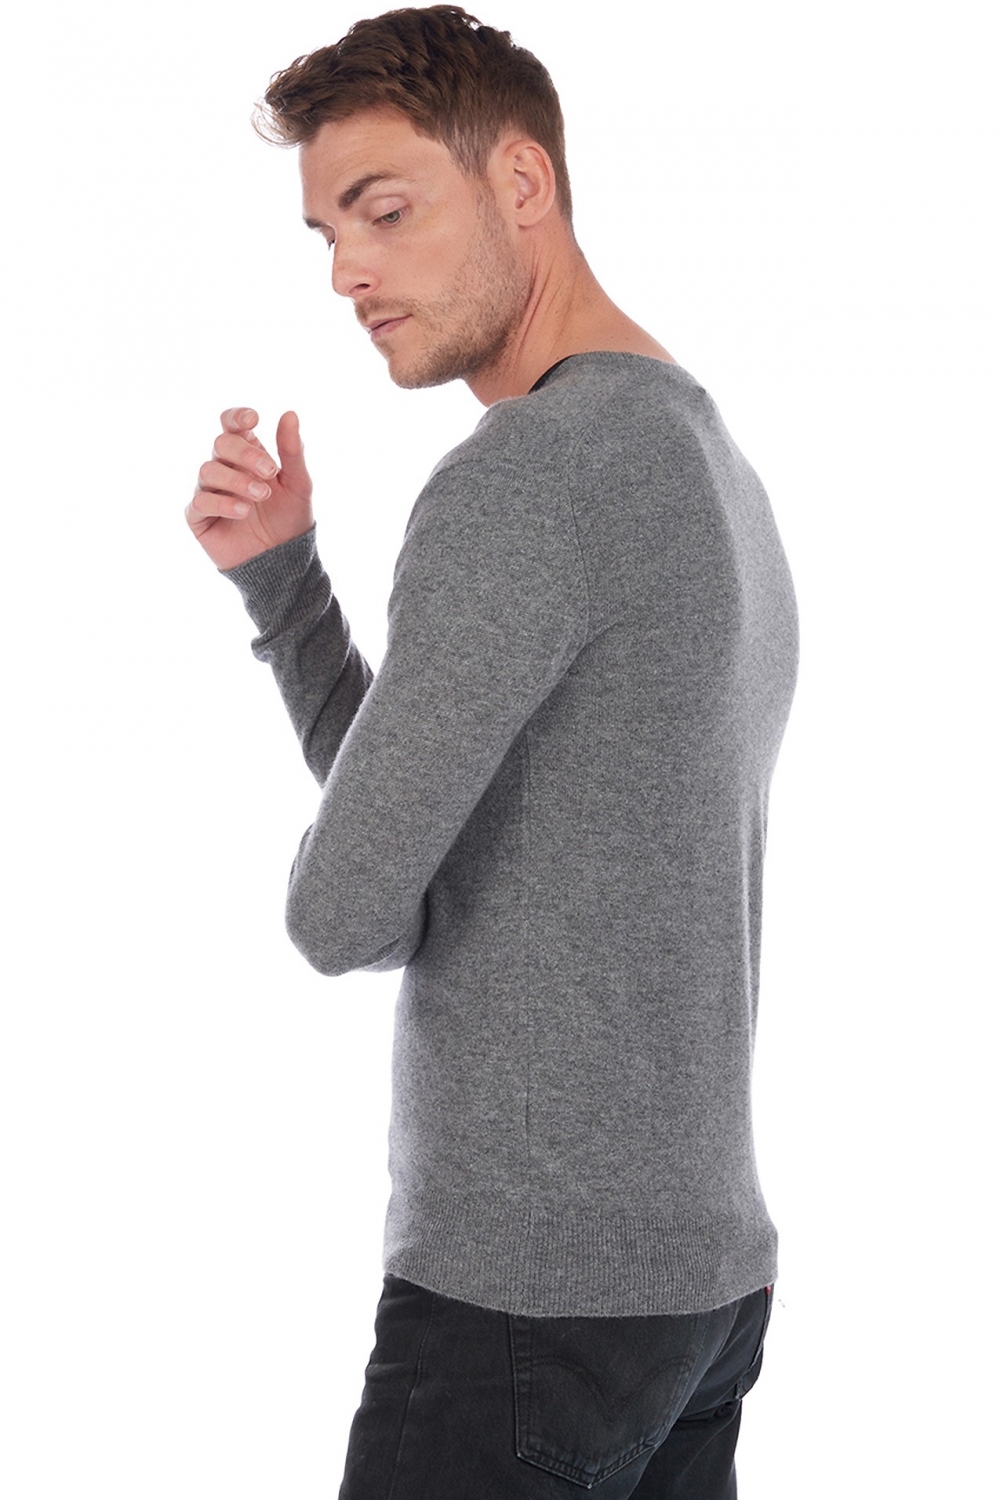 Cashmere men basic sweaters at low prices tor grey marl m